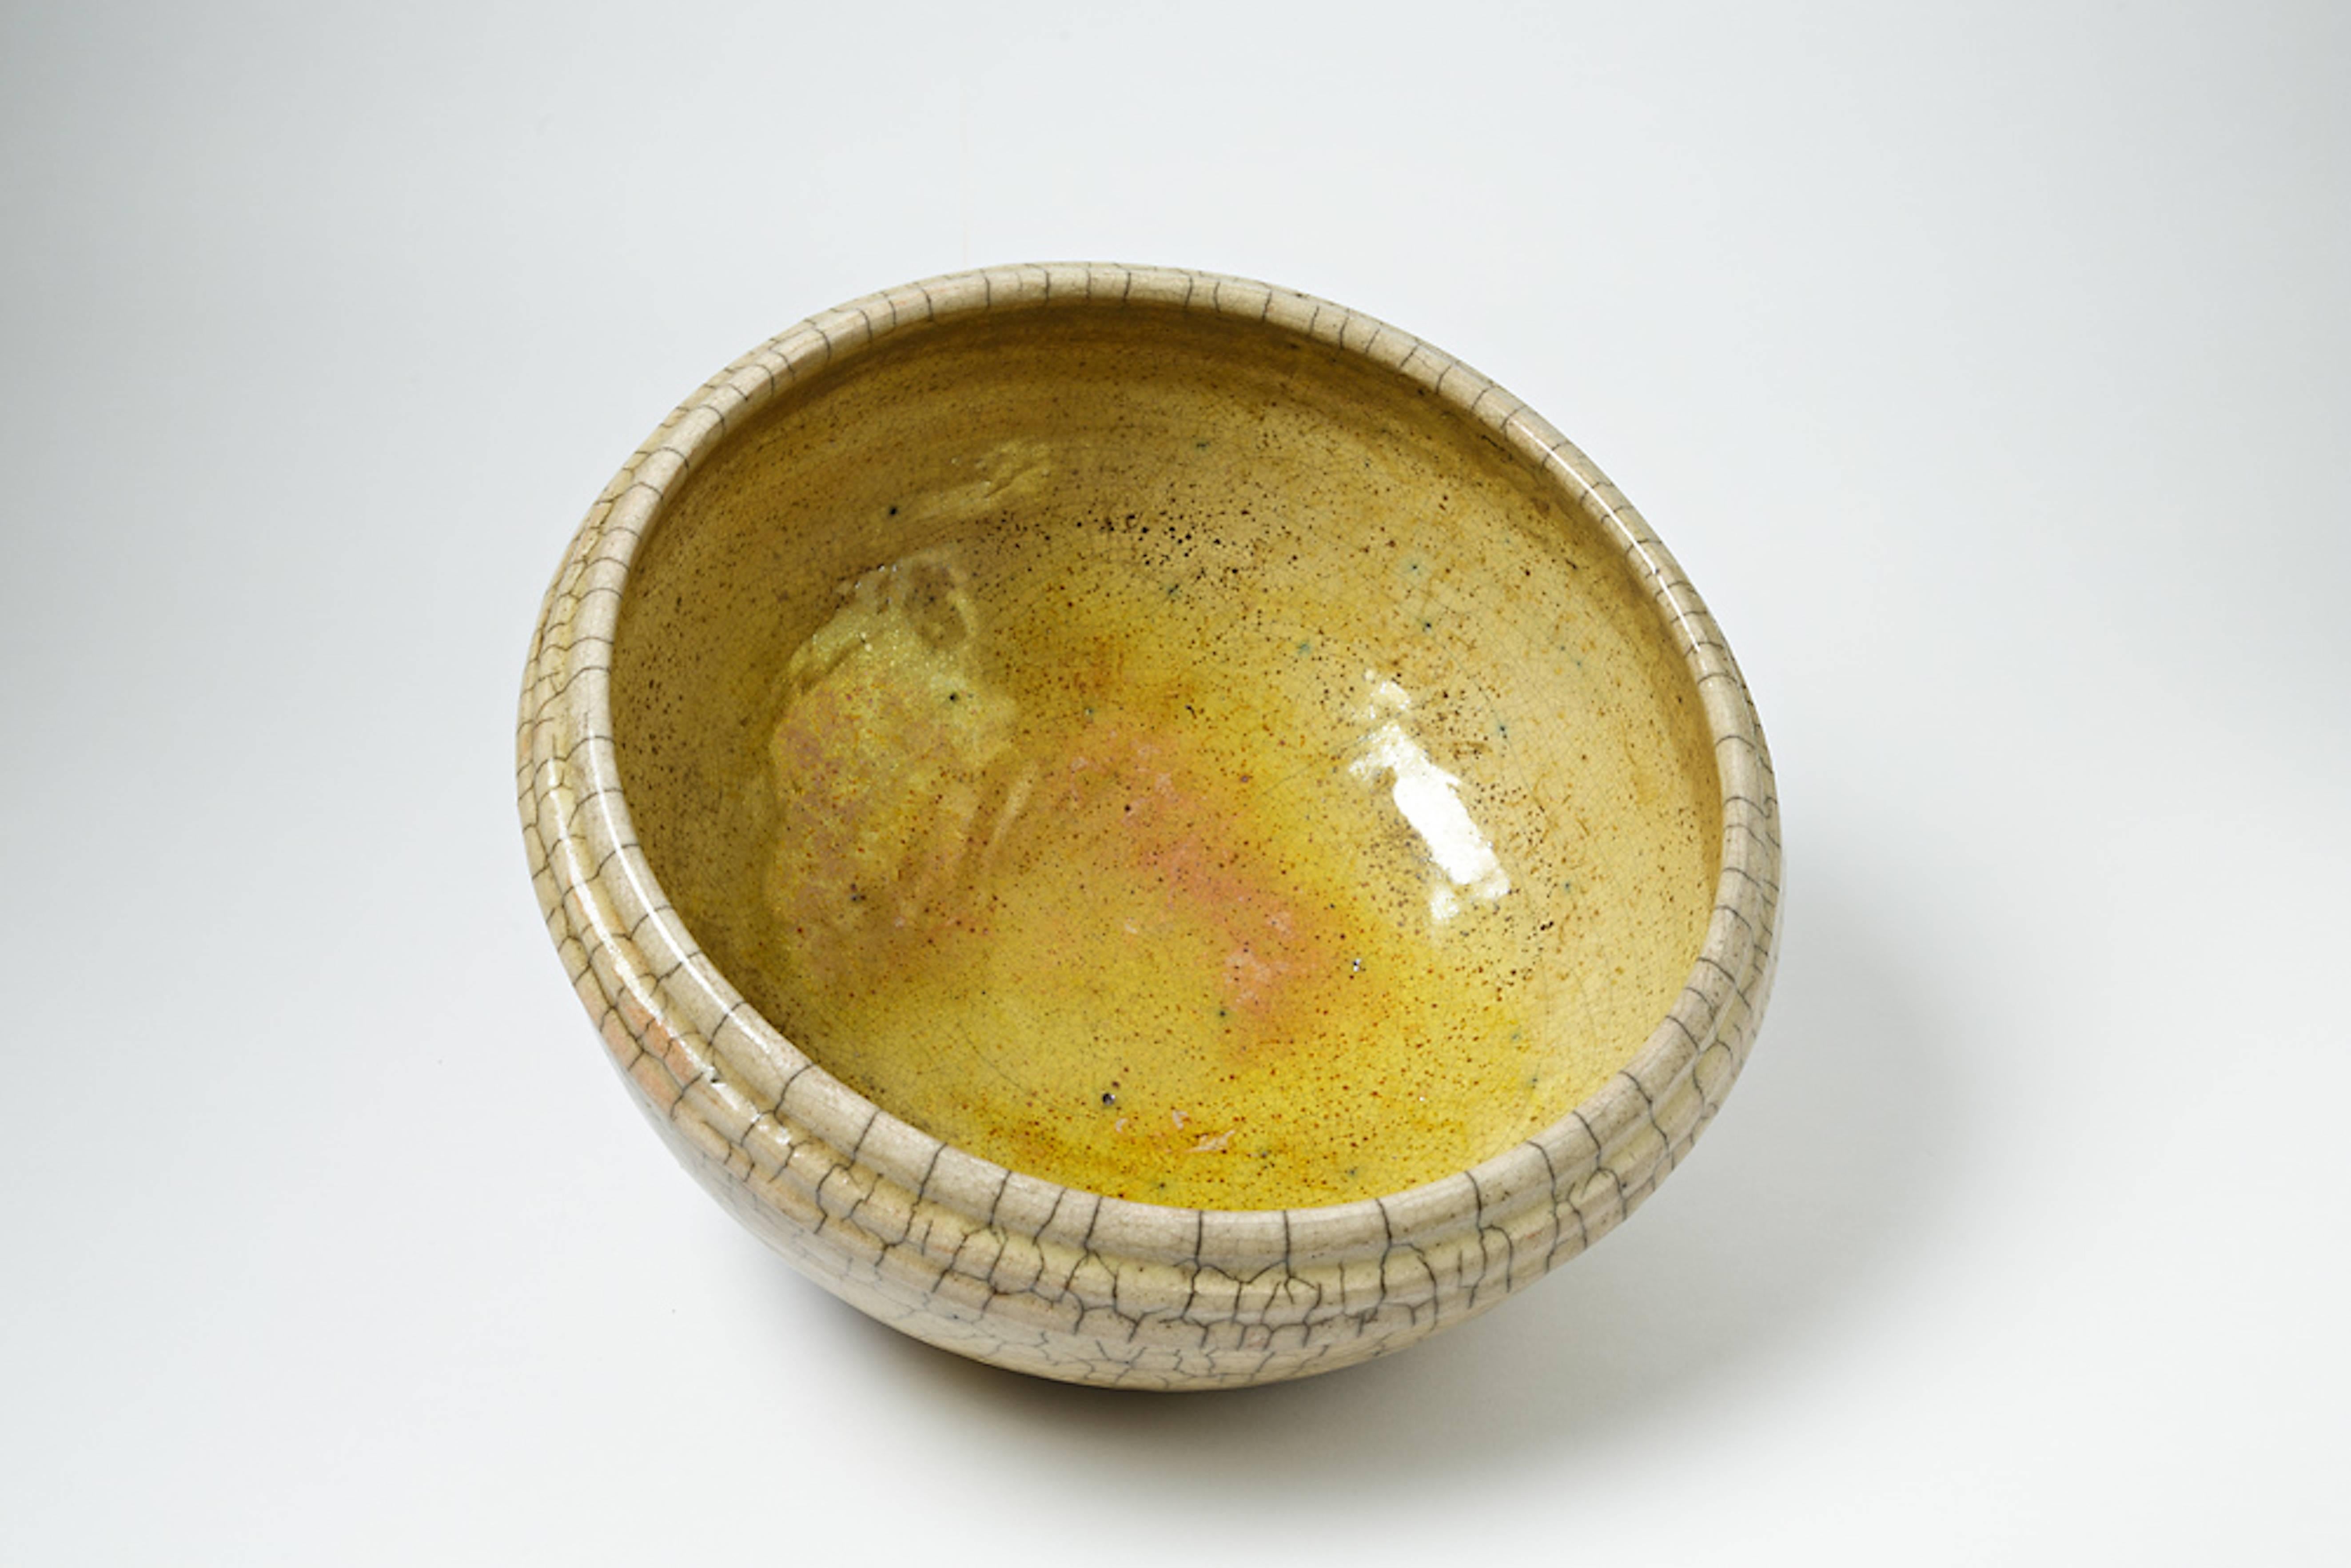 French Important White and Yellow Ceramic Bowl by Giselle Buthod-Garcon, circa 1980